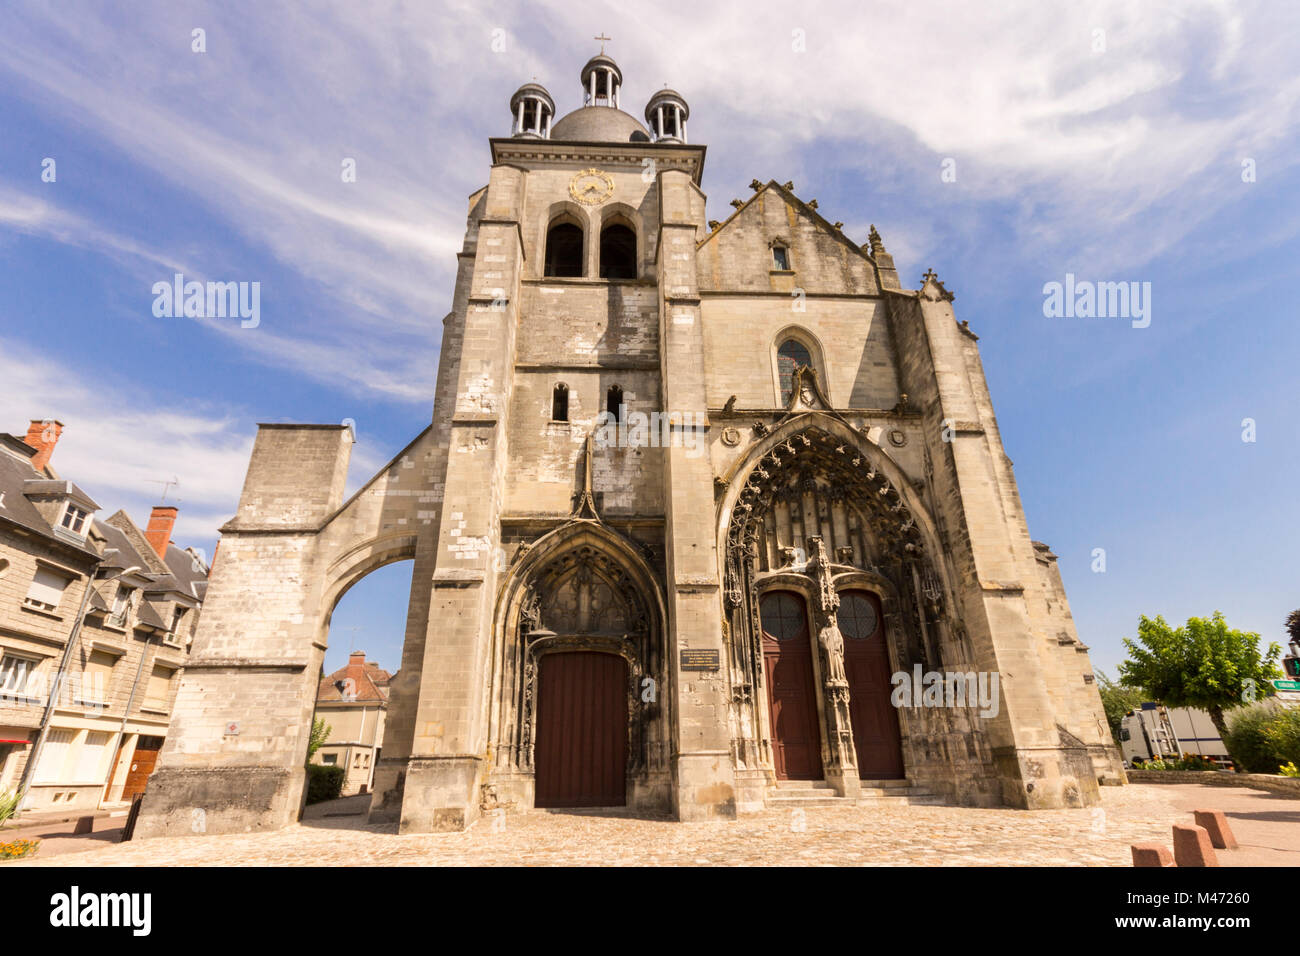 The Church of Saint-Étienne in Arcis-sur-Aube, a historical monument in the small French commune in Grand Est, France Stock Photo